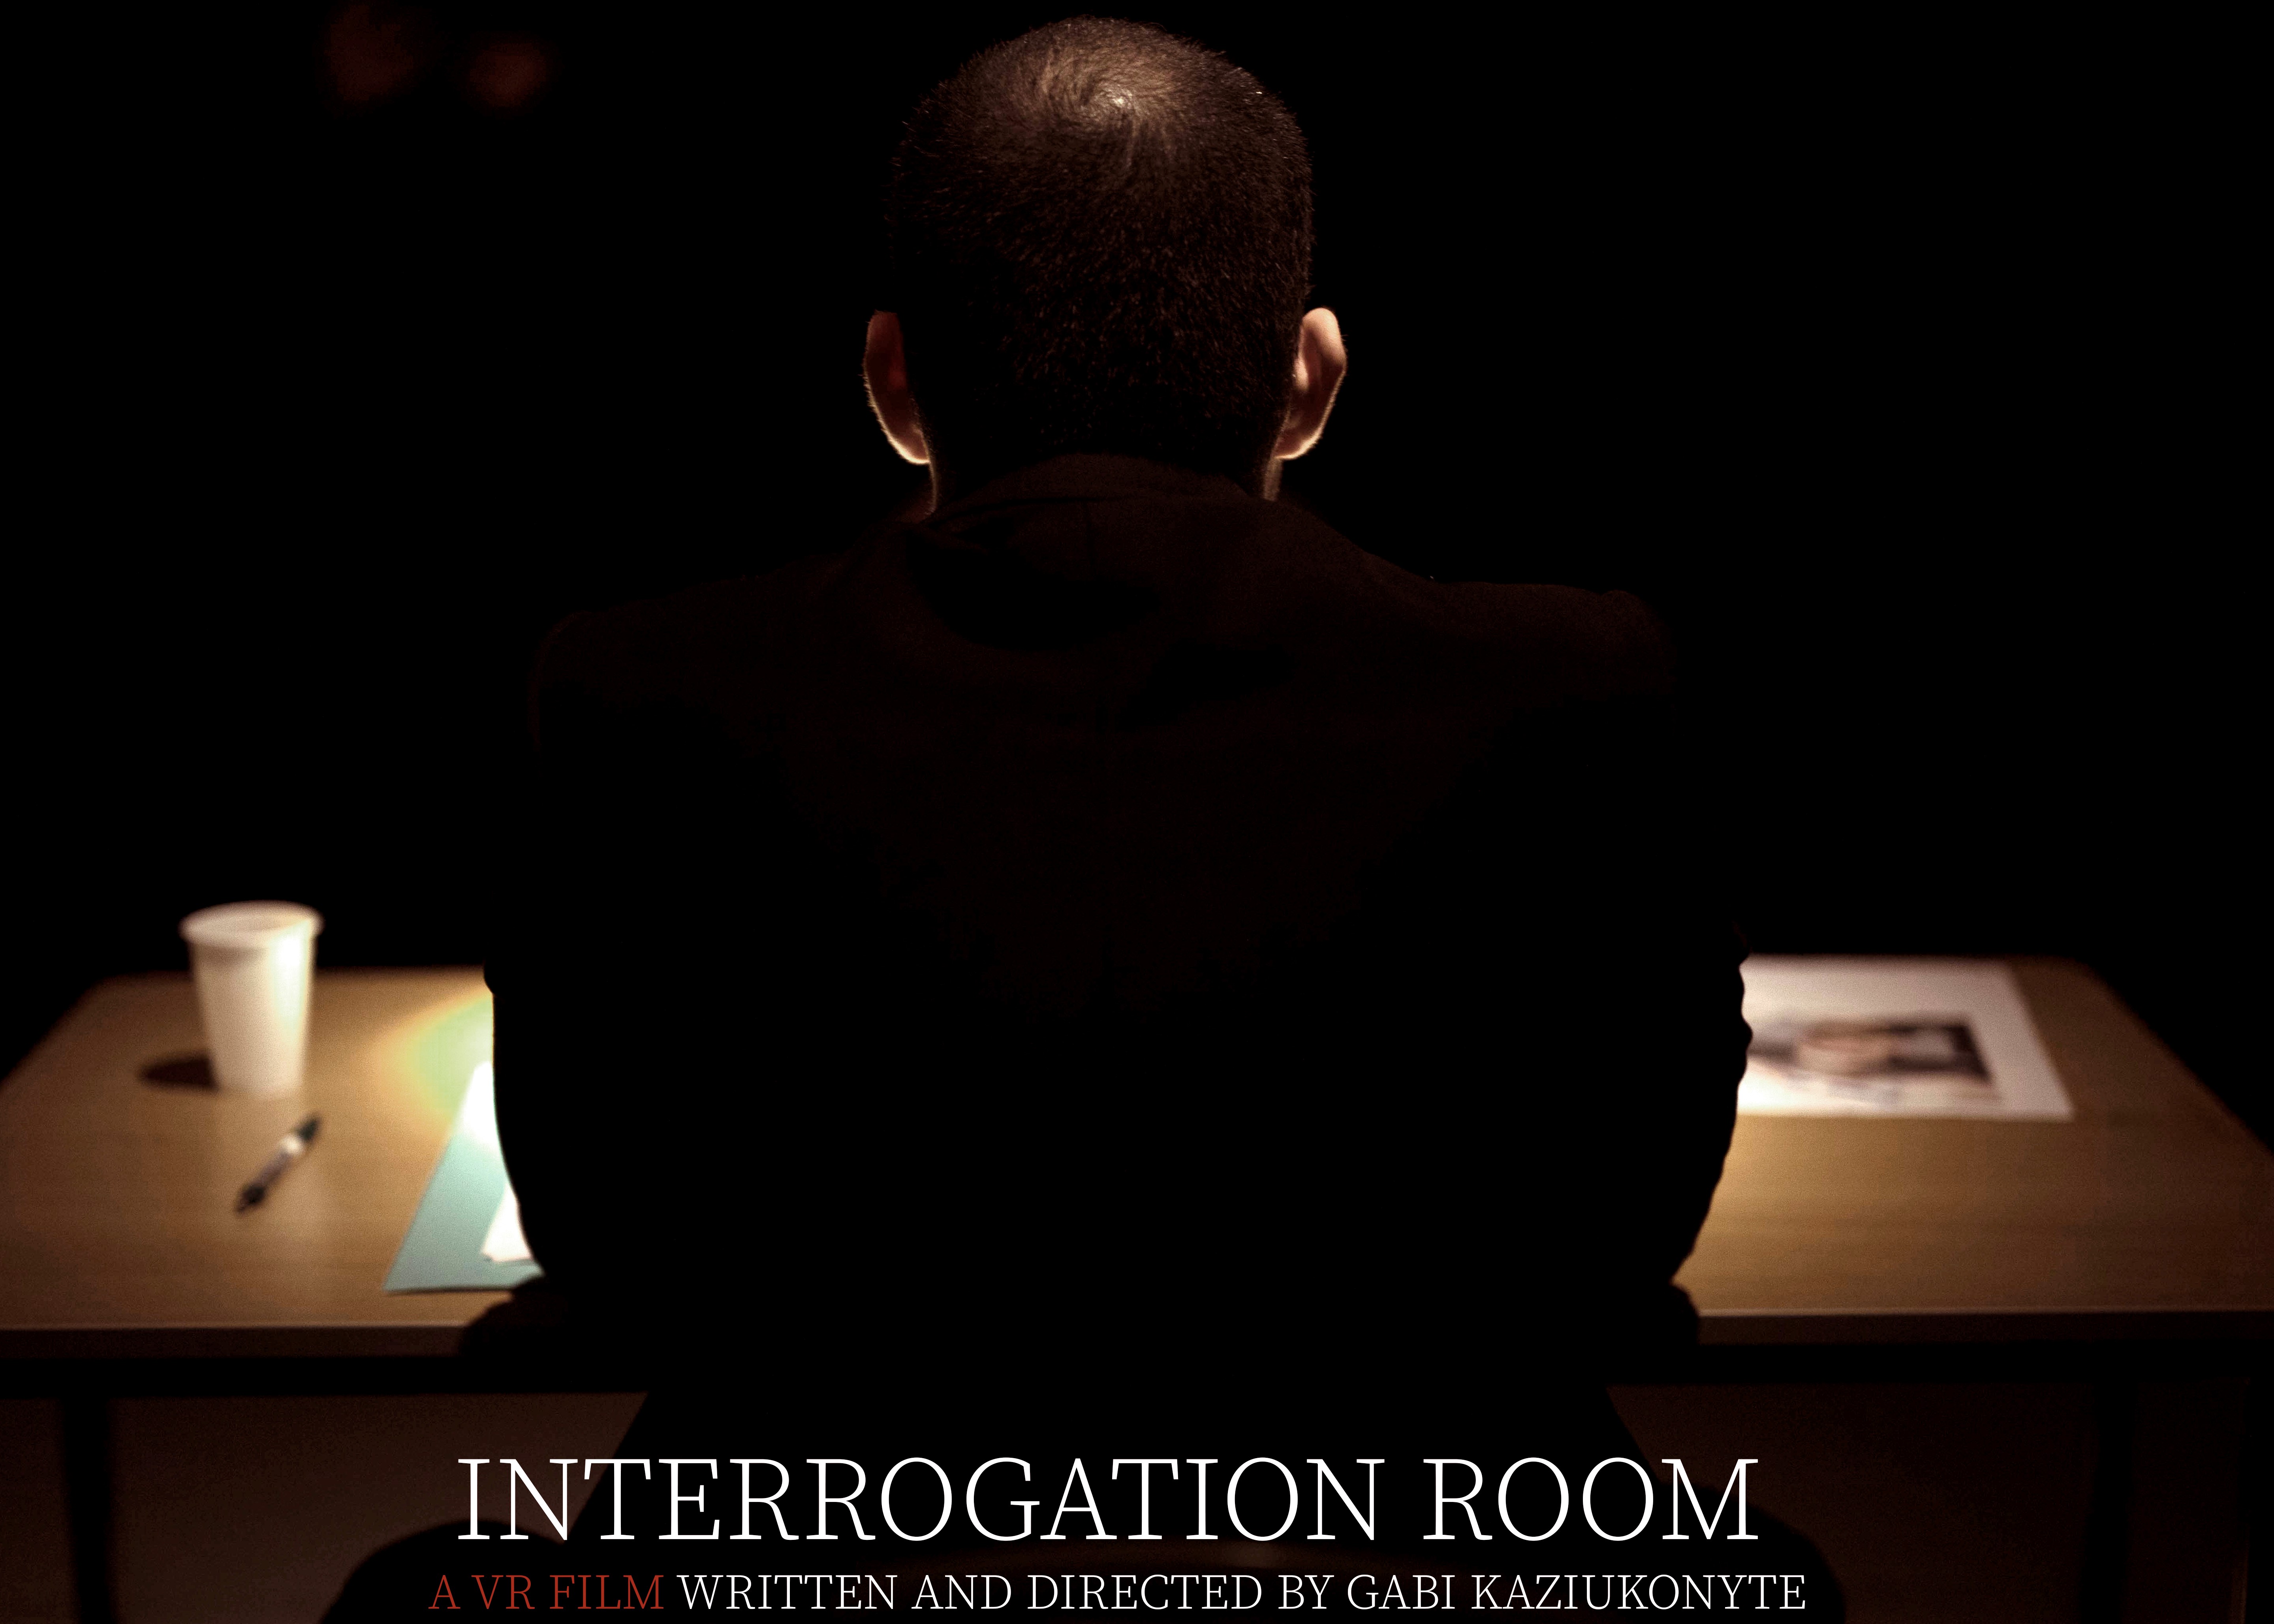 Poster for Interrogation Room film showing man sitting at desk seen from behind.